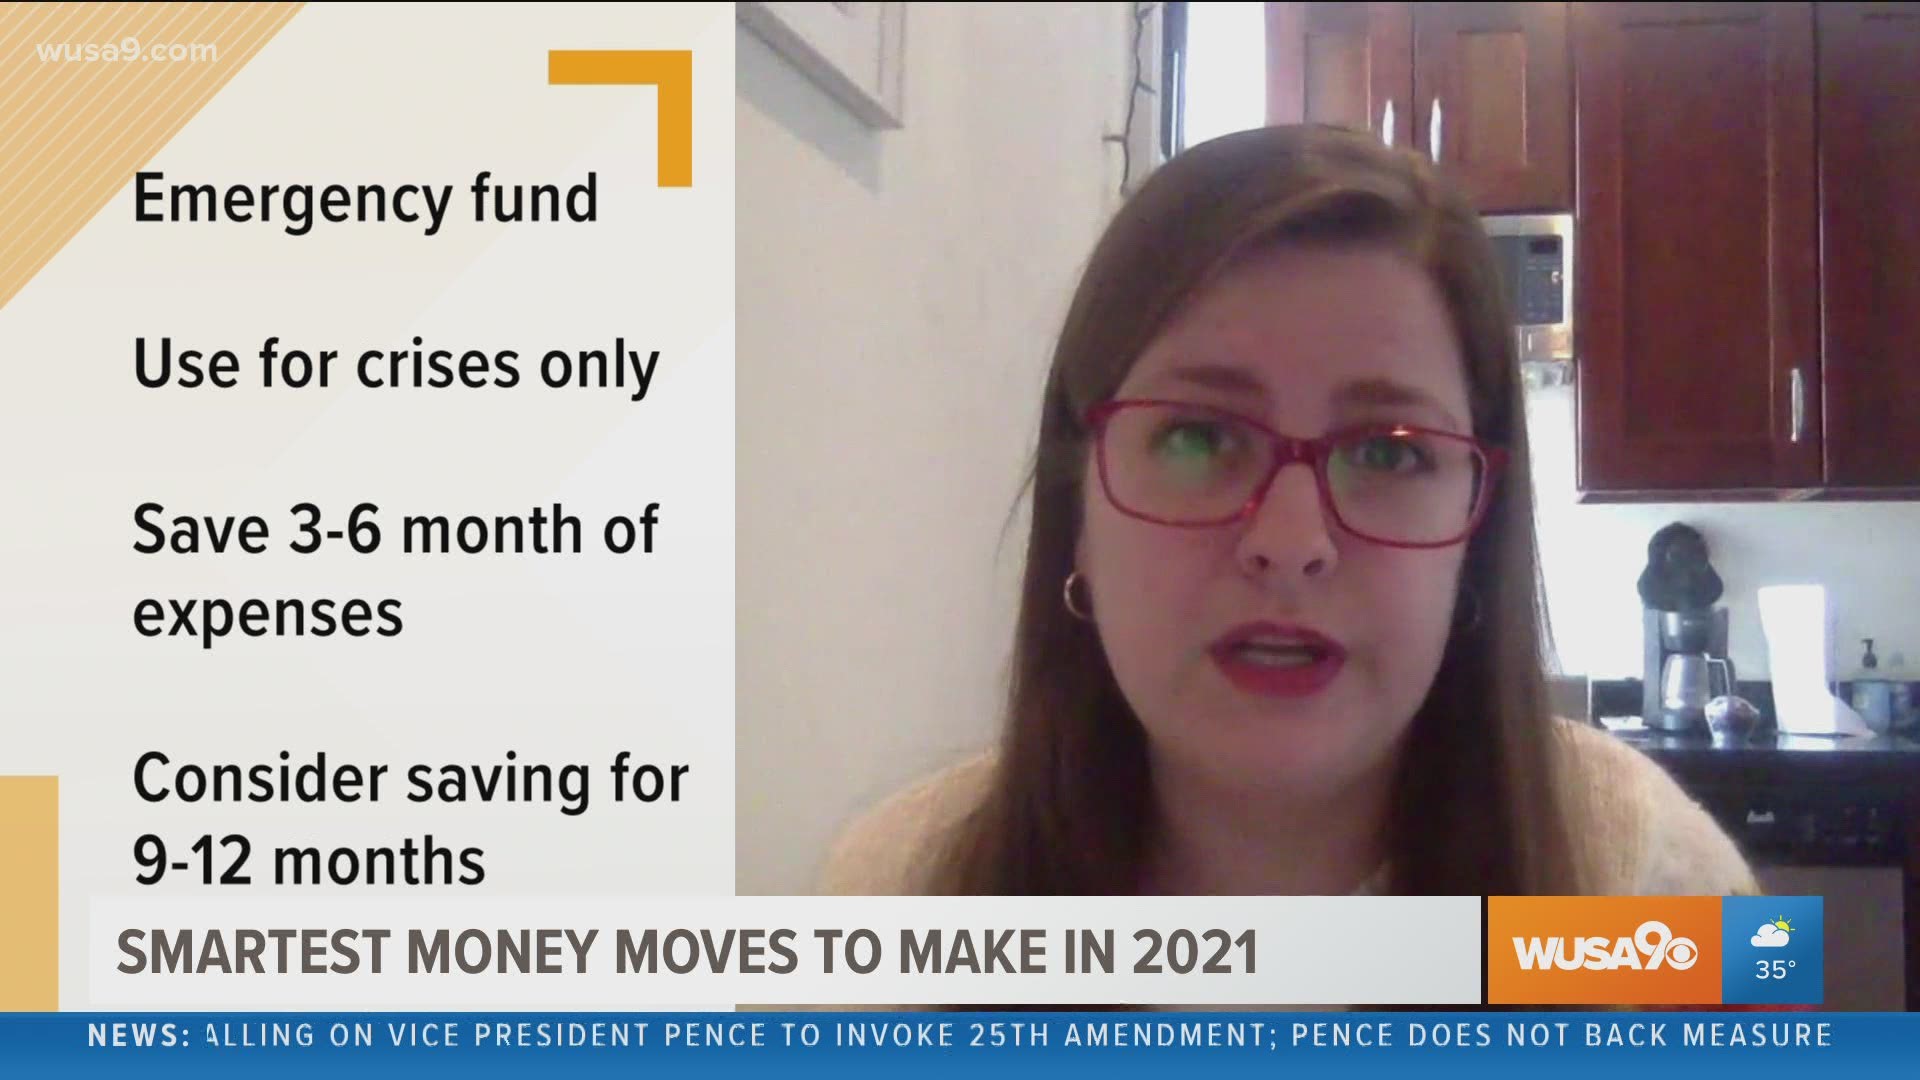 Money reporter and "Dollar Scholar" Julia Glum shares some tips on how to manage your money for 2021.